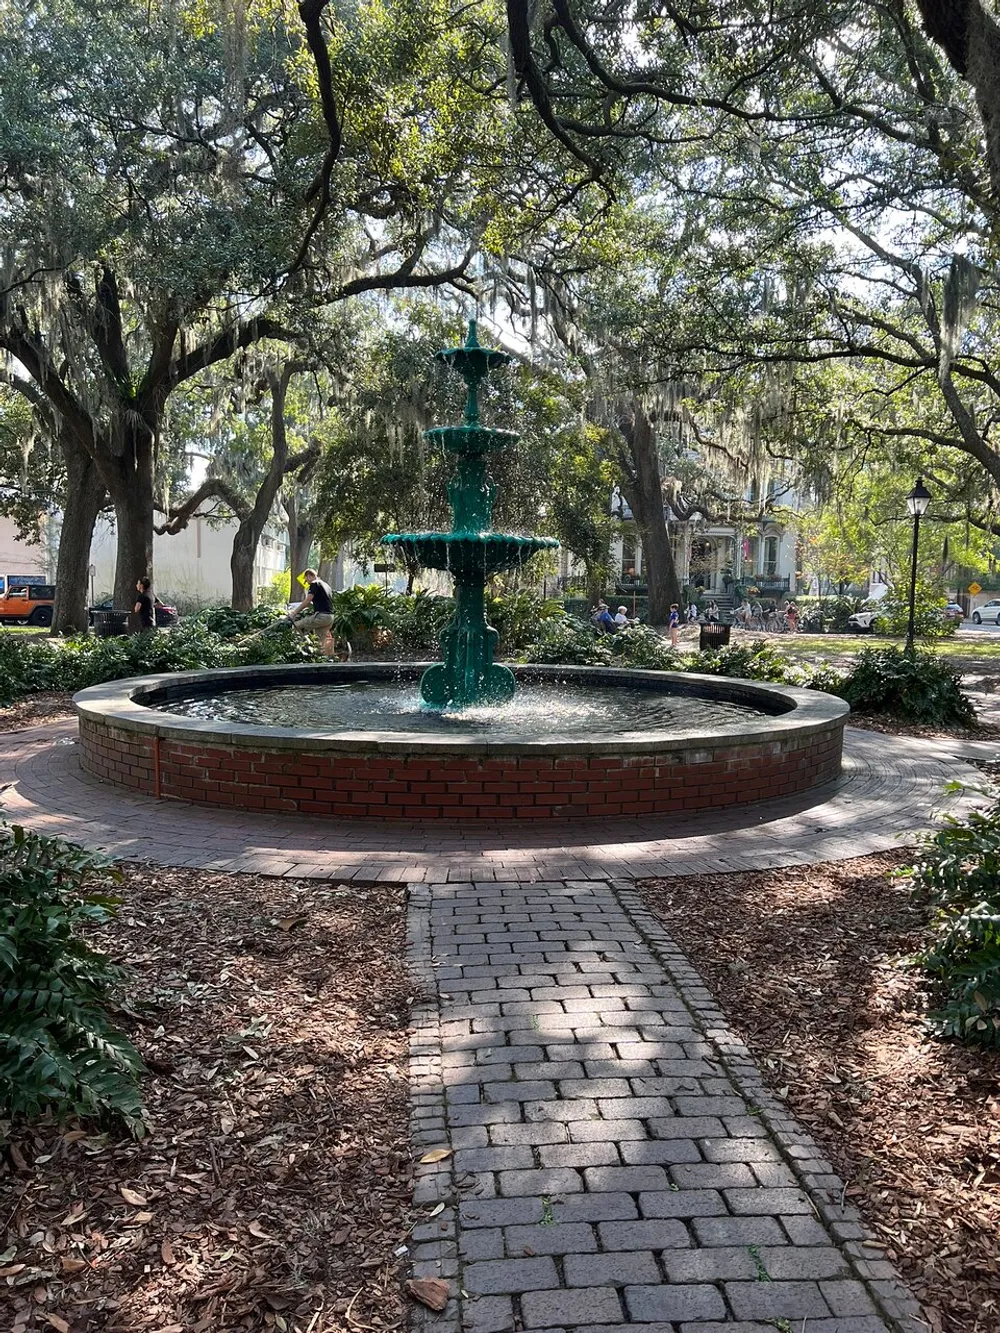 A serene public park scene featuring a multi-tiered fountain surrounded by lush trees draped with Spanish moss brick pathways and people enjoying the outdoors